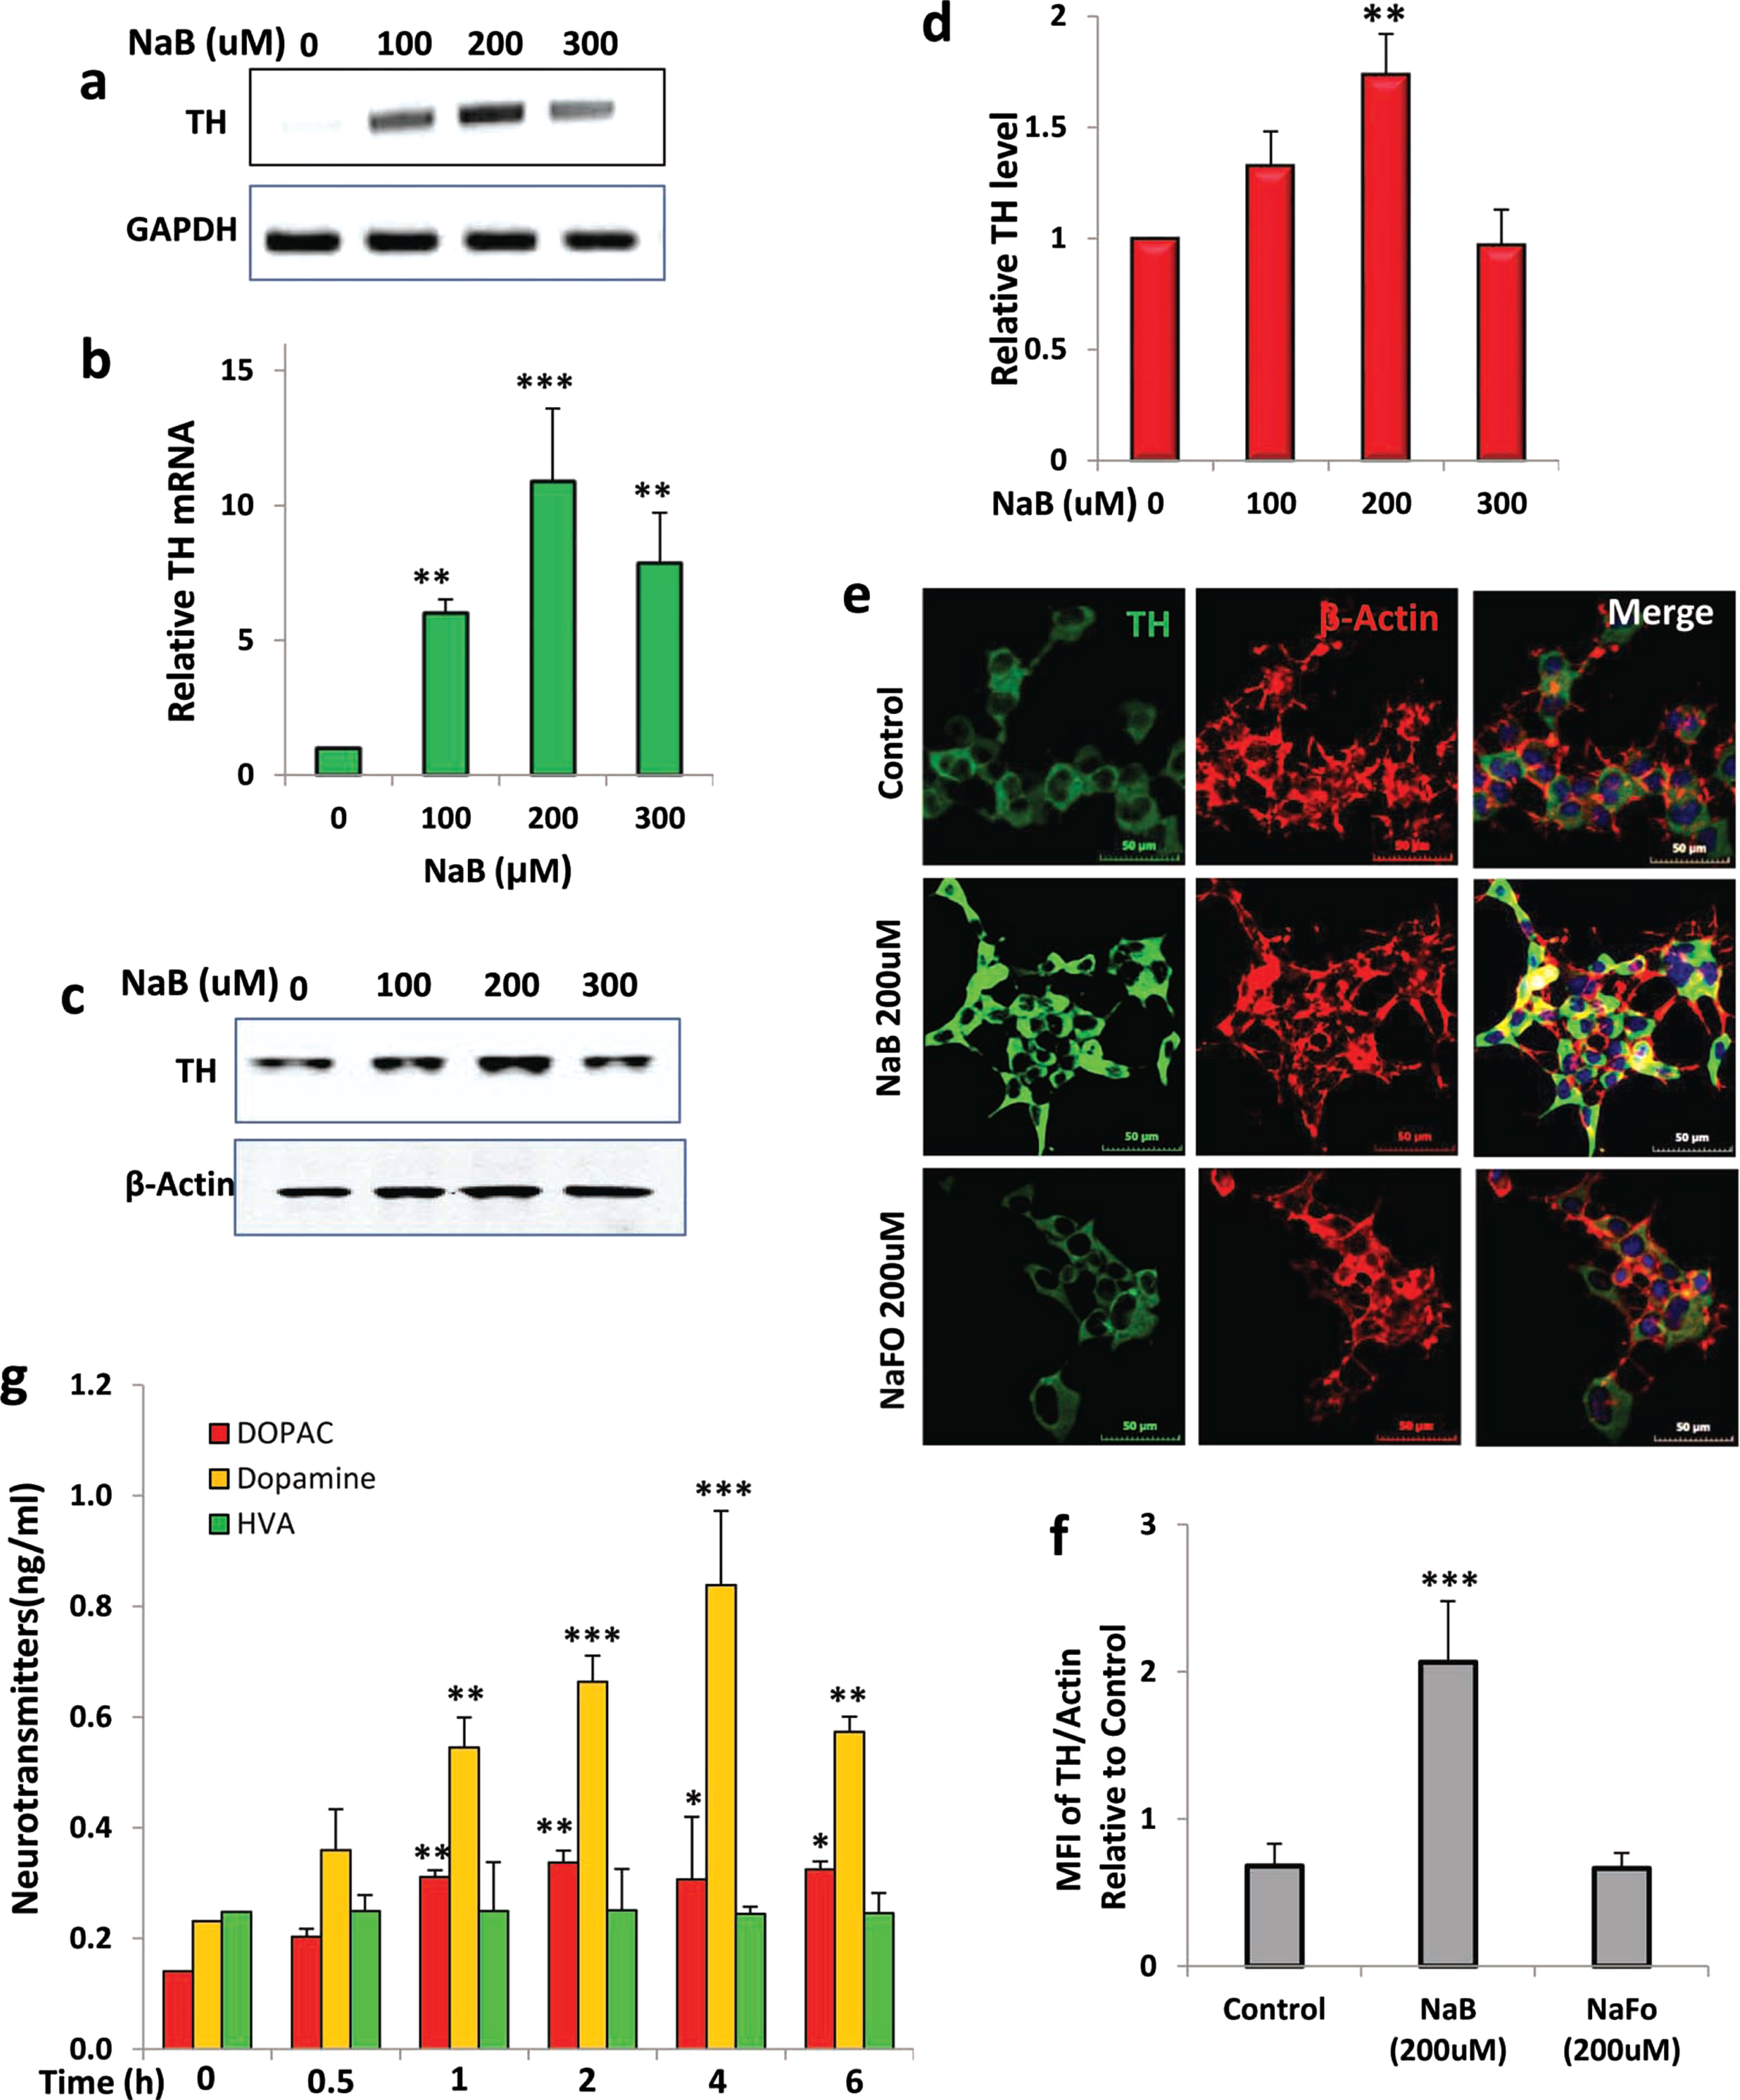 NaB increases tyrosine hydroxylase (TH) in mouse MN9D neuronal cells in dose- and time-dependent manner. A) Mouse MN9D neuronal cells were treated with different concentrations of NaB under serum-free conditions for 2 h followed by monitoring the mRNA expression of TH by semi-quantitative RT-PCR (A) and real-time PCR (B). The protein level of TH was monitored by western blot (C). Actin was run as a loading control. Bands were scanned and values (TH/actin) presented as relative to control (D). Results are mean±SD of different experiments. Cells were treated with 200μM NaB for 2 h followed by double-label immunofluorescence with antibodies against TH and actin (E). Sodium formate (NaFO) was used as a negative control for NaB. Mean fluorescence intensity (MFI) of TH and actin was calculated in 20 different cells (F) and presented as MFI-TH/MFI-actin. Results are mean±SEM of 20 different cells per group. G) Cells were treated with 200μM NaB for different time periods followed by measuring the level of DA, DOPAC and HVA in supernatants by HPLC. Results are mean±SD of at least three independent experiments. *p < 0.05; **p < 0.01; ***p < 0.001 versus control. One-way ANOVA with Tukey’s multiple comparison test shows that time-dependent increase in DA by NaB is significant (p < 0.0001).